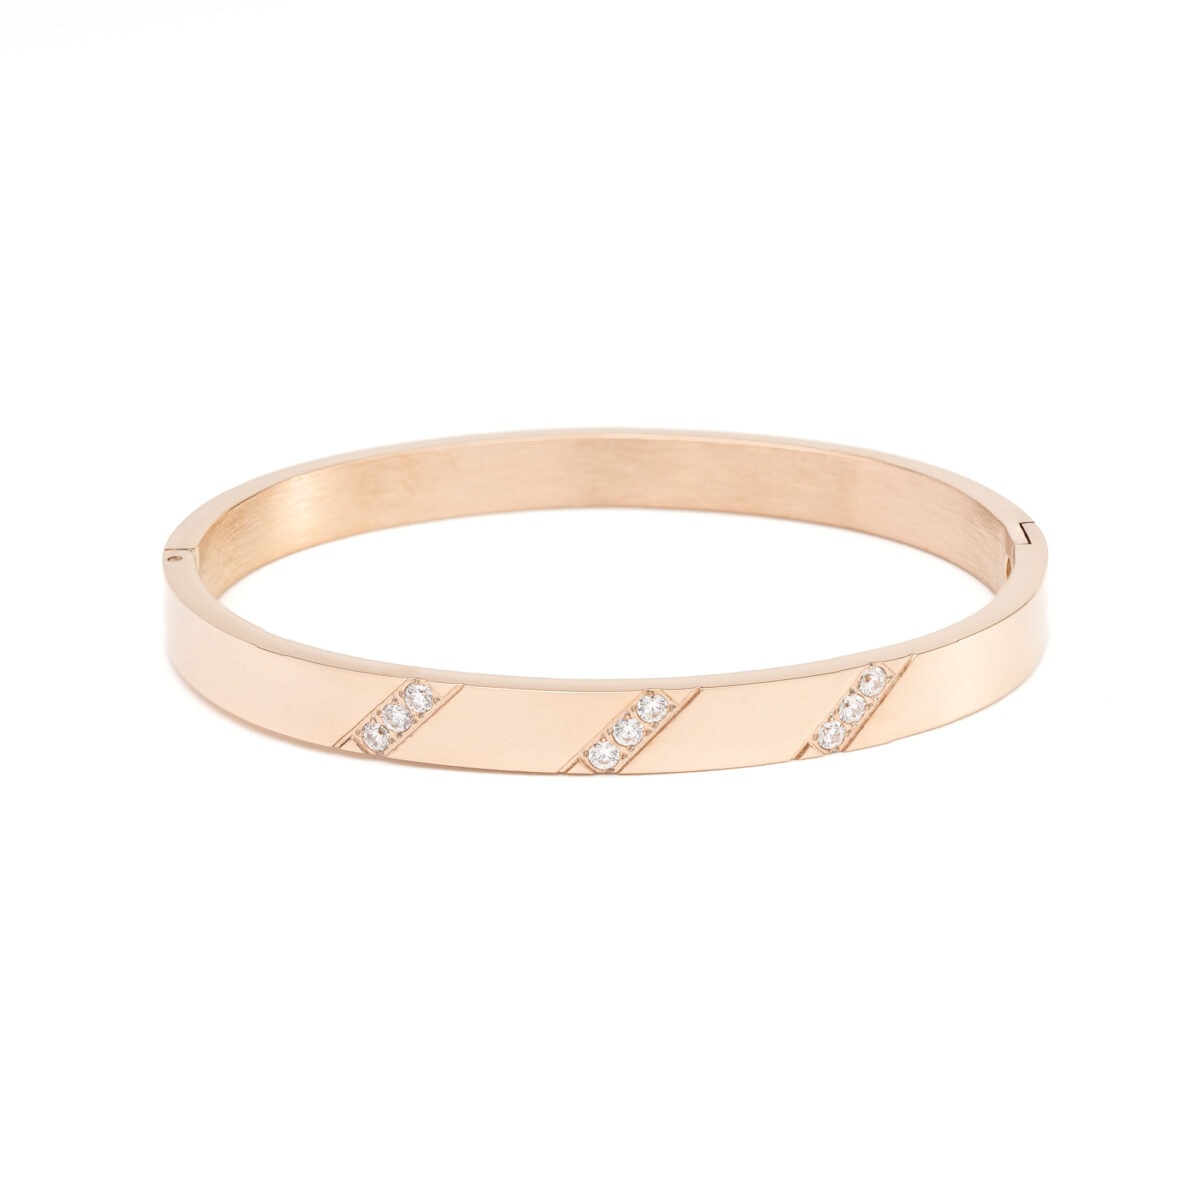 https://m.clubbella.co/product/siena-rose-gold-bangle/ Siena Rose Gold Bangle (1)